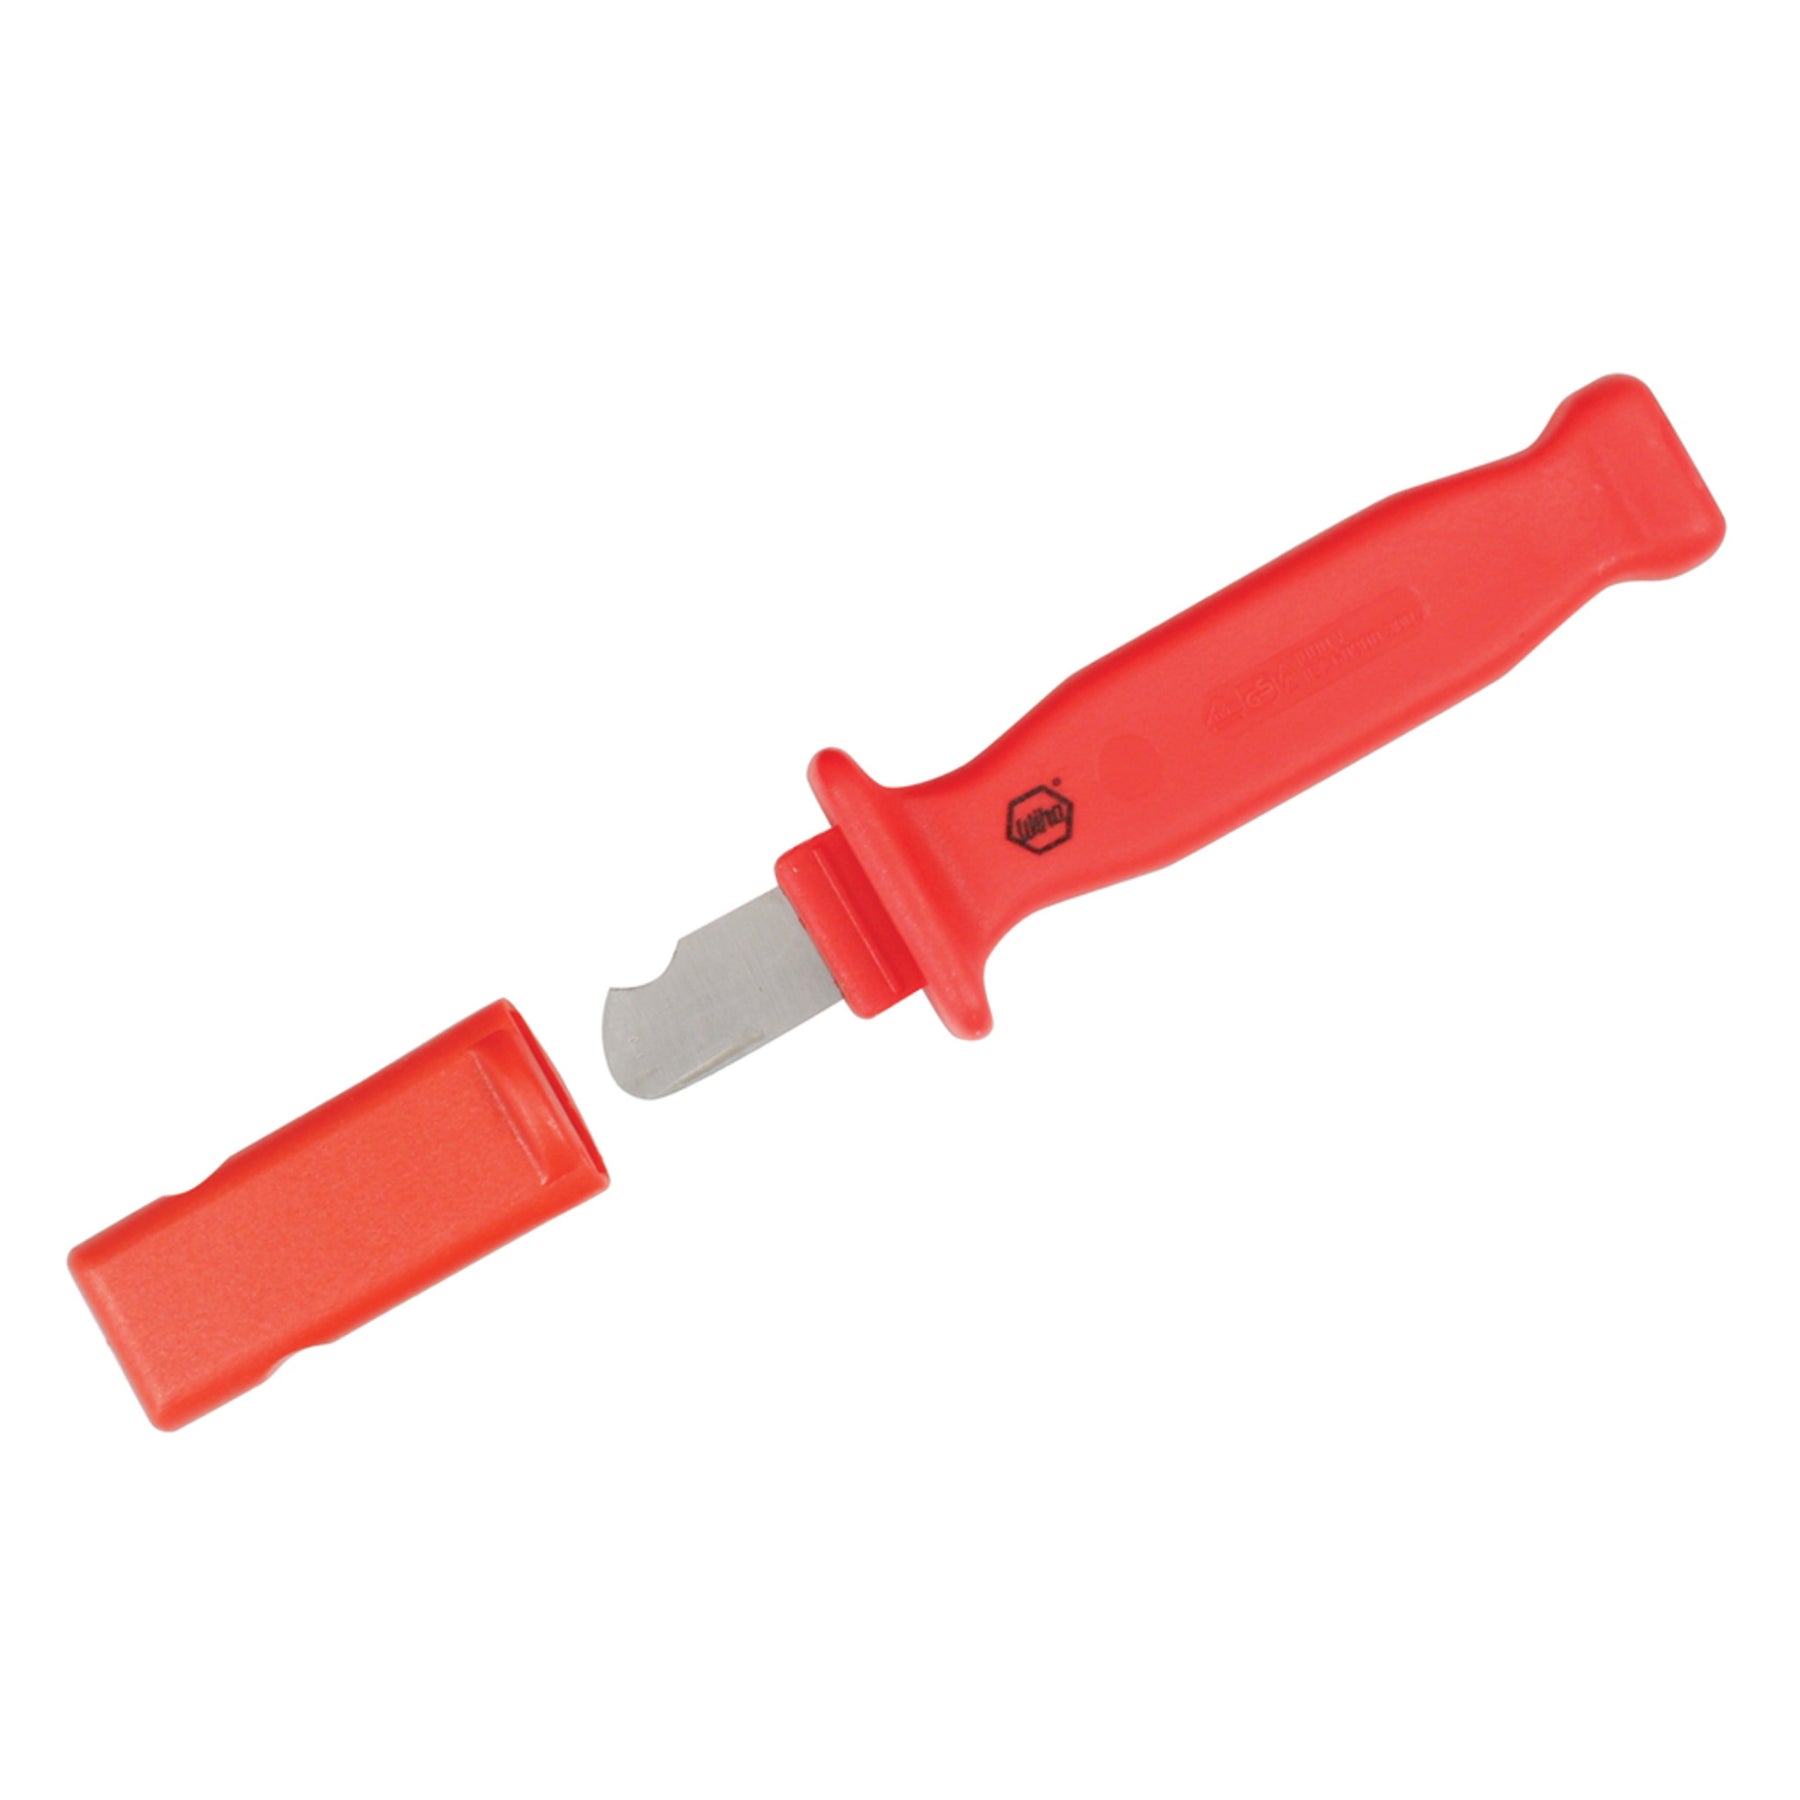 Wiha 15050 Insulated Cable Stripping Knife 35mm